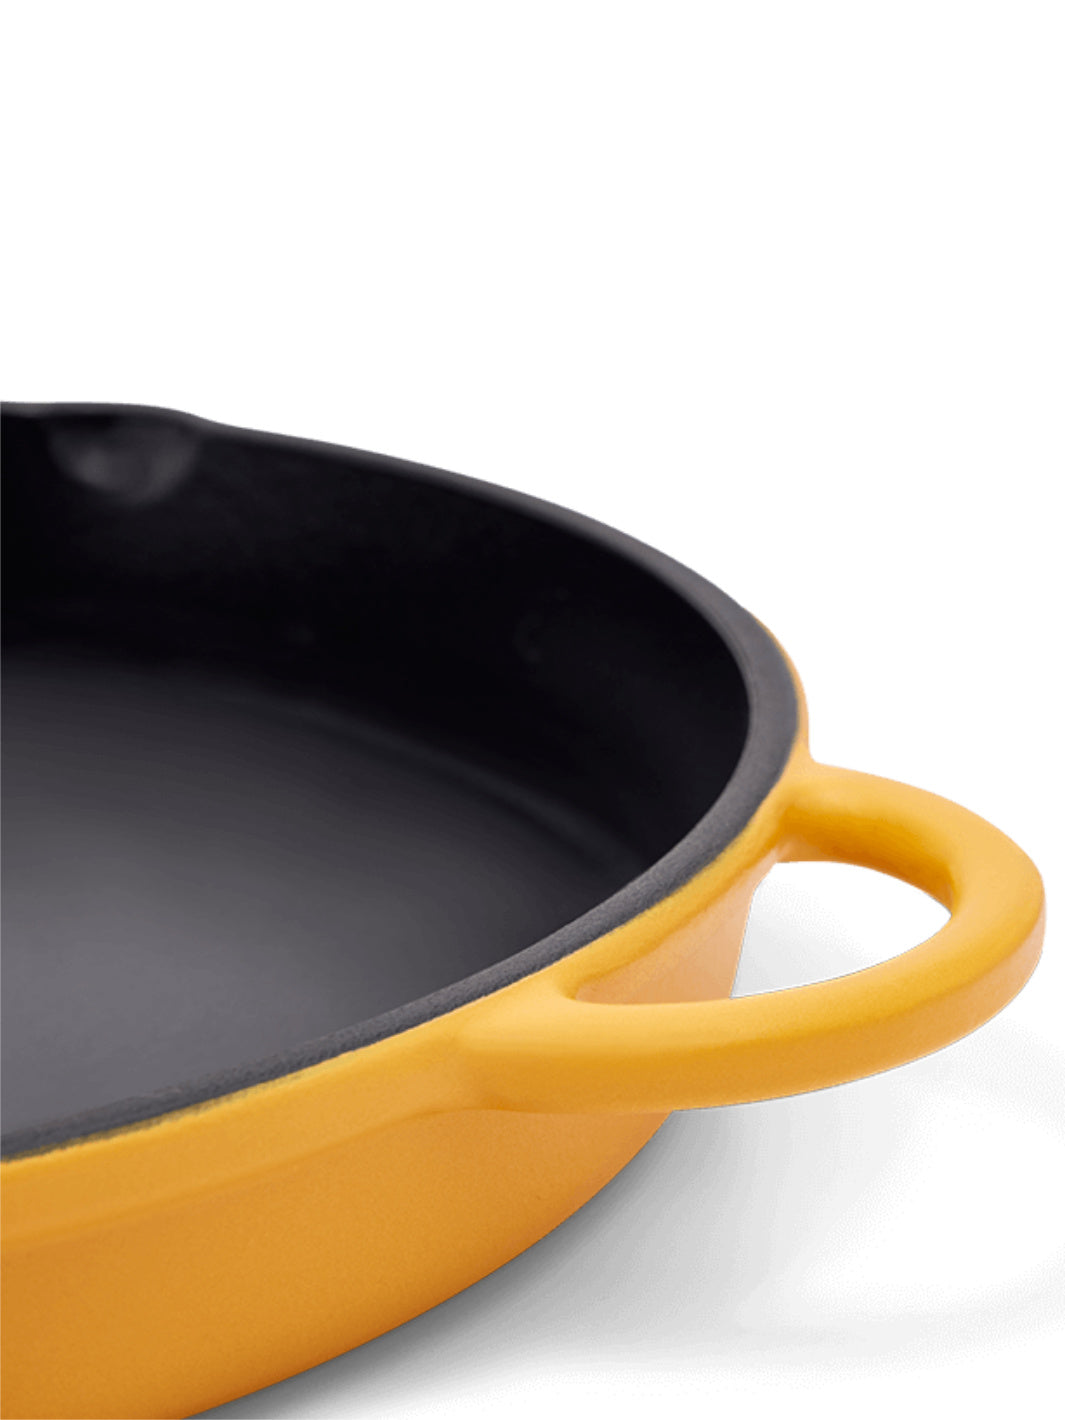 King Sear: Cast-Iron Skillet - 12 Inches